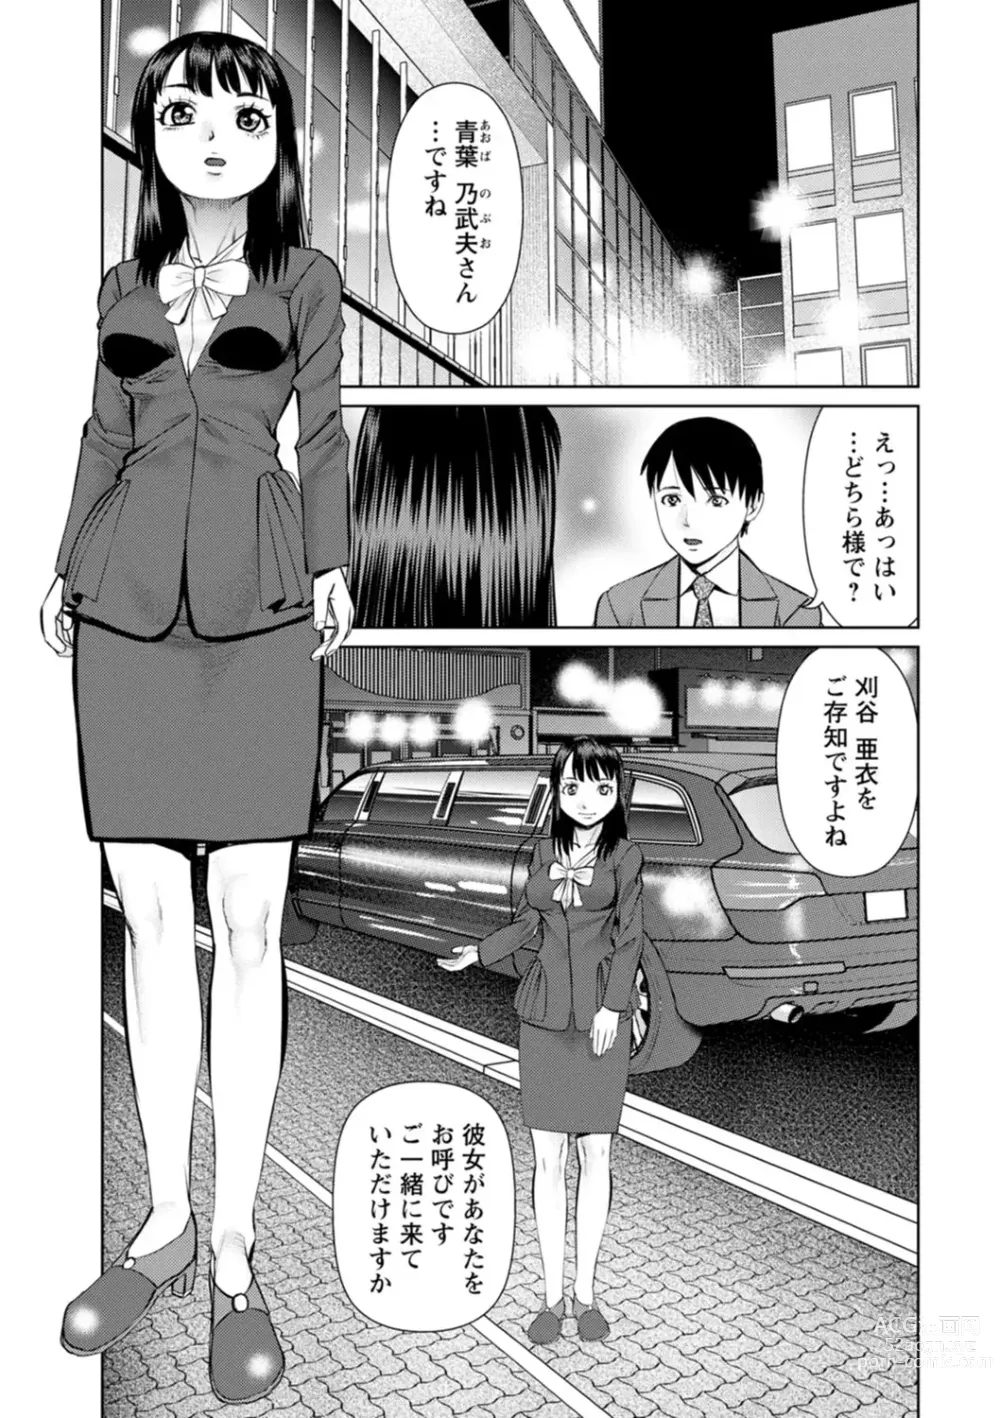 Page 9 of manga Kimi to no LOVE Lesson